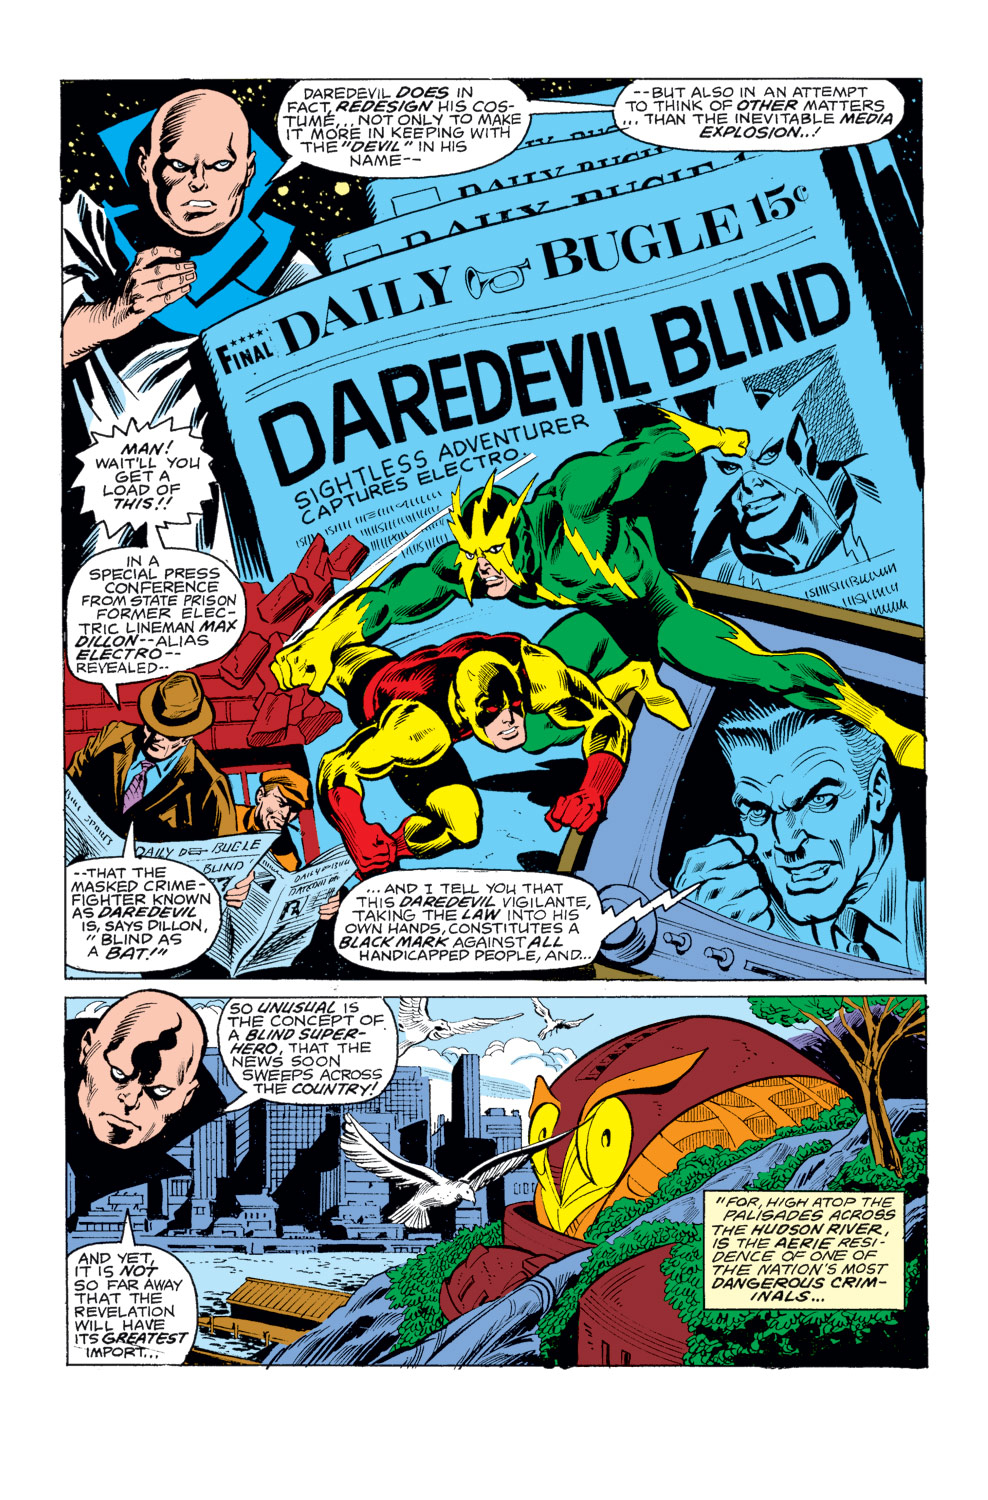 What If? (1977) issue 8 - The world knew that Daredevil is blind - Page 11